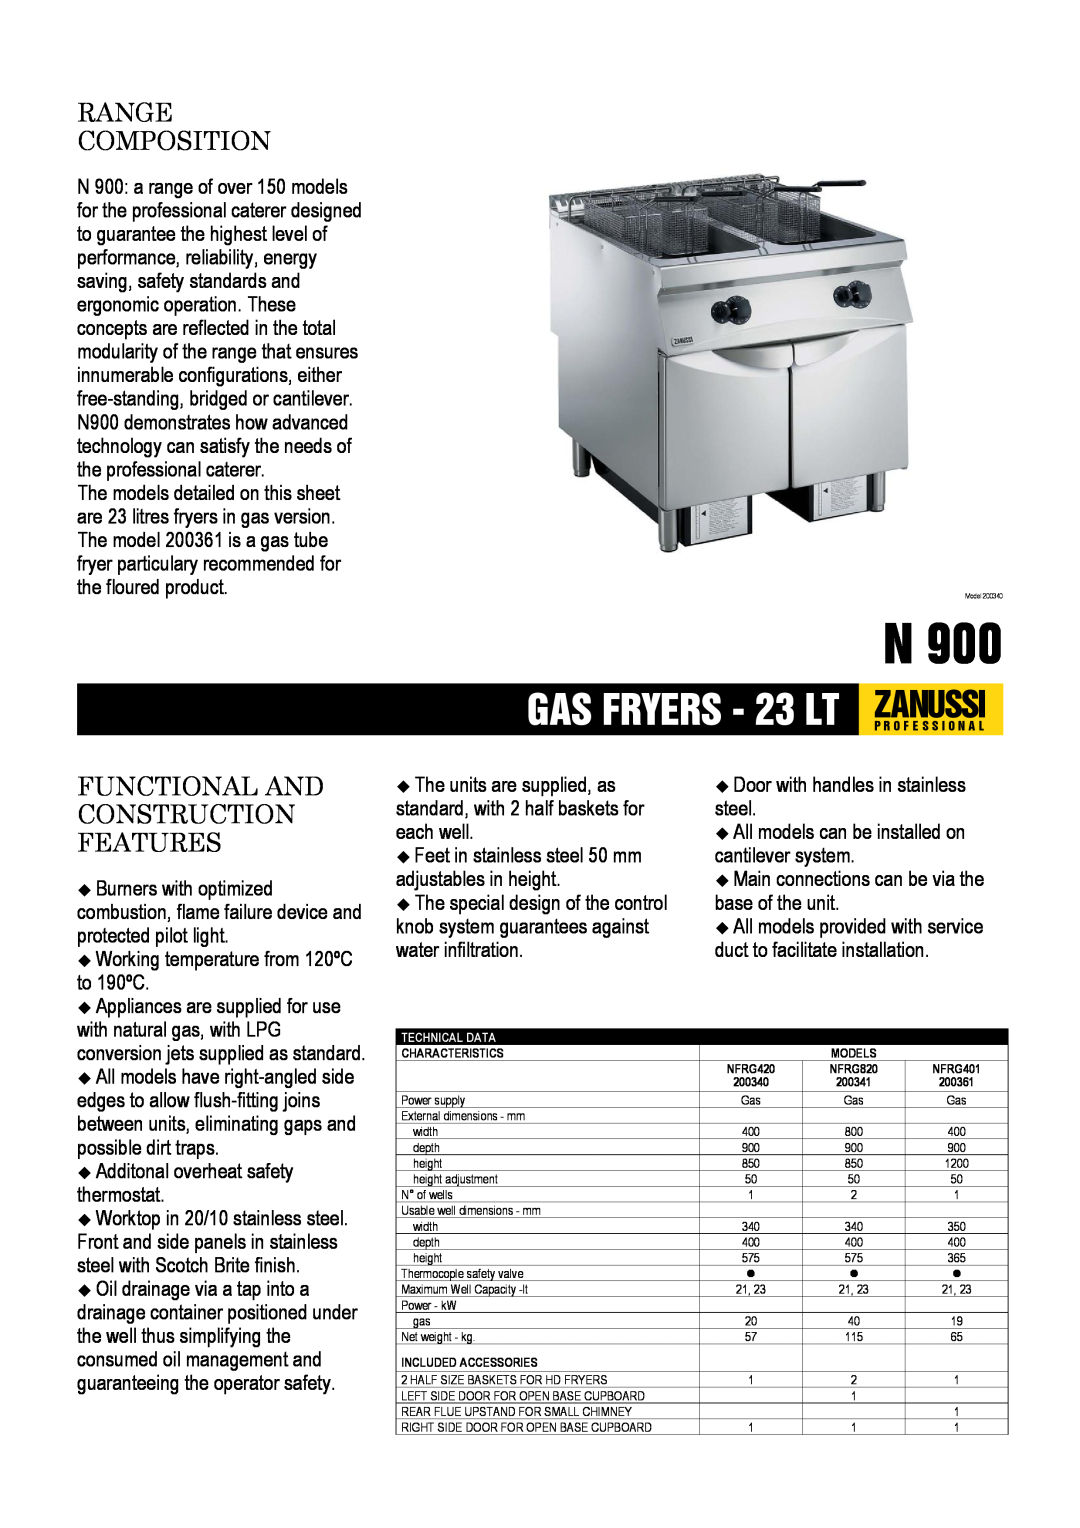 Zanussi NFRG420, NFRG401 dimensions GAS FRYERS - 23 LT, Zanussi, Range Composition, Functional And Construction Features 